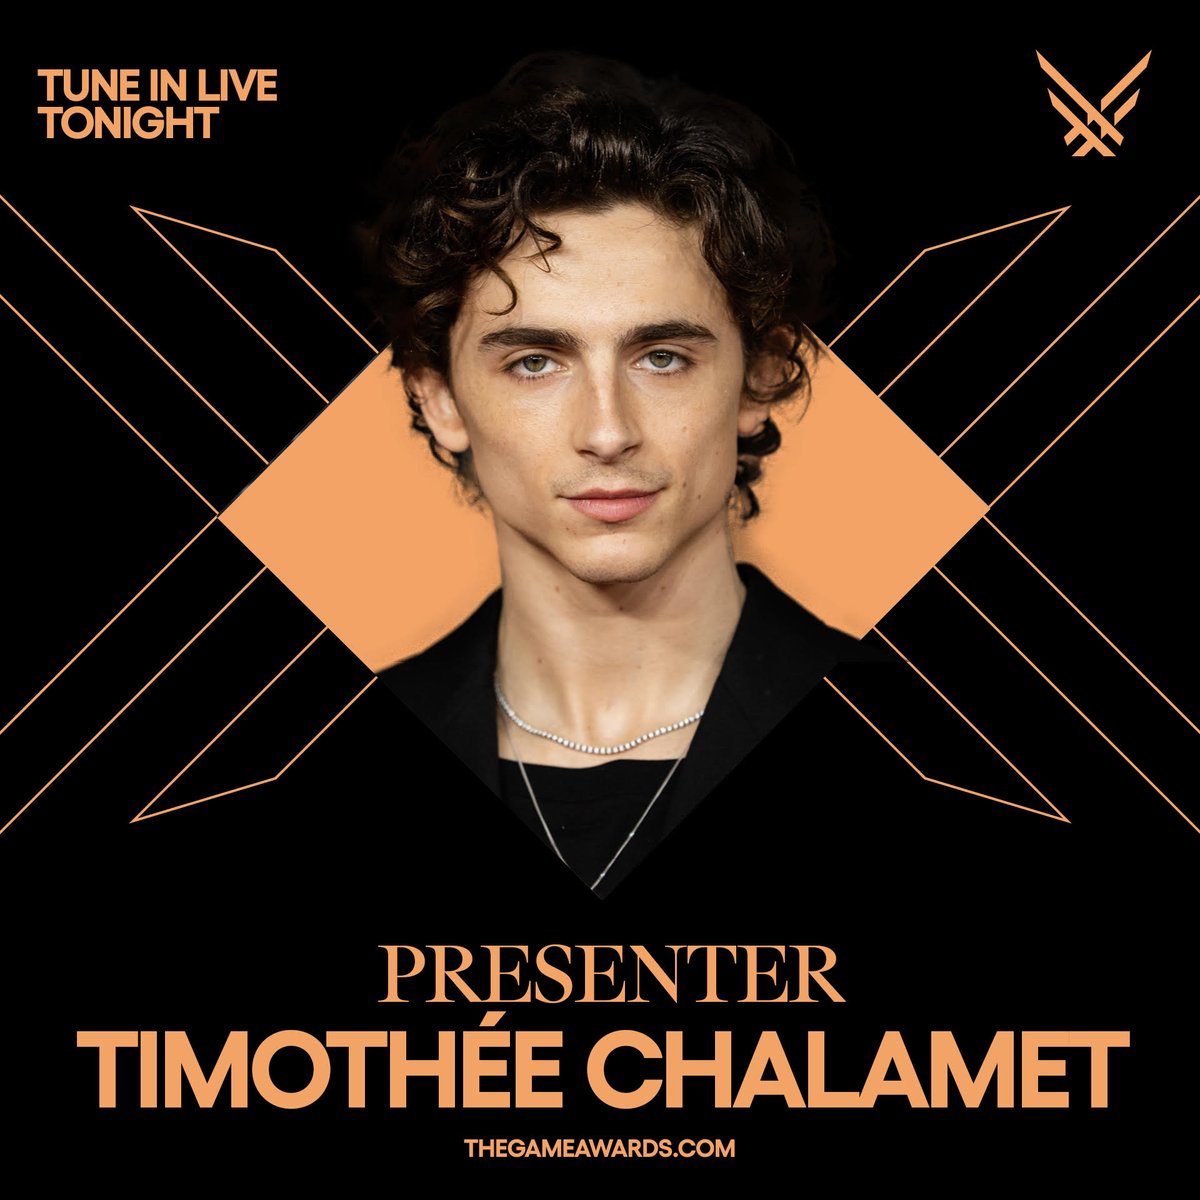 Tonight, we welcome @WonkaMovie and @DuneMovie star Timothée Chalamet to #TheGameAwards as a presenter. 

Watch the free global livestream at thegameawards.com at 4:30p PT / 7:30p ET / 12:30a GMT.

👀